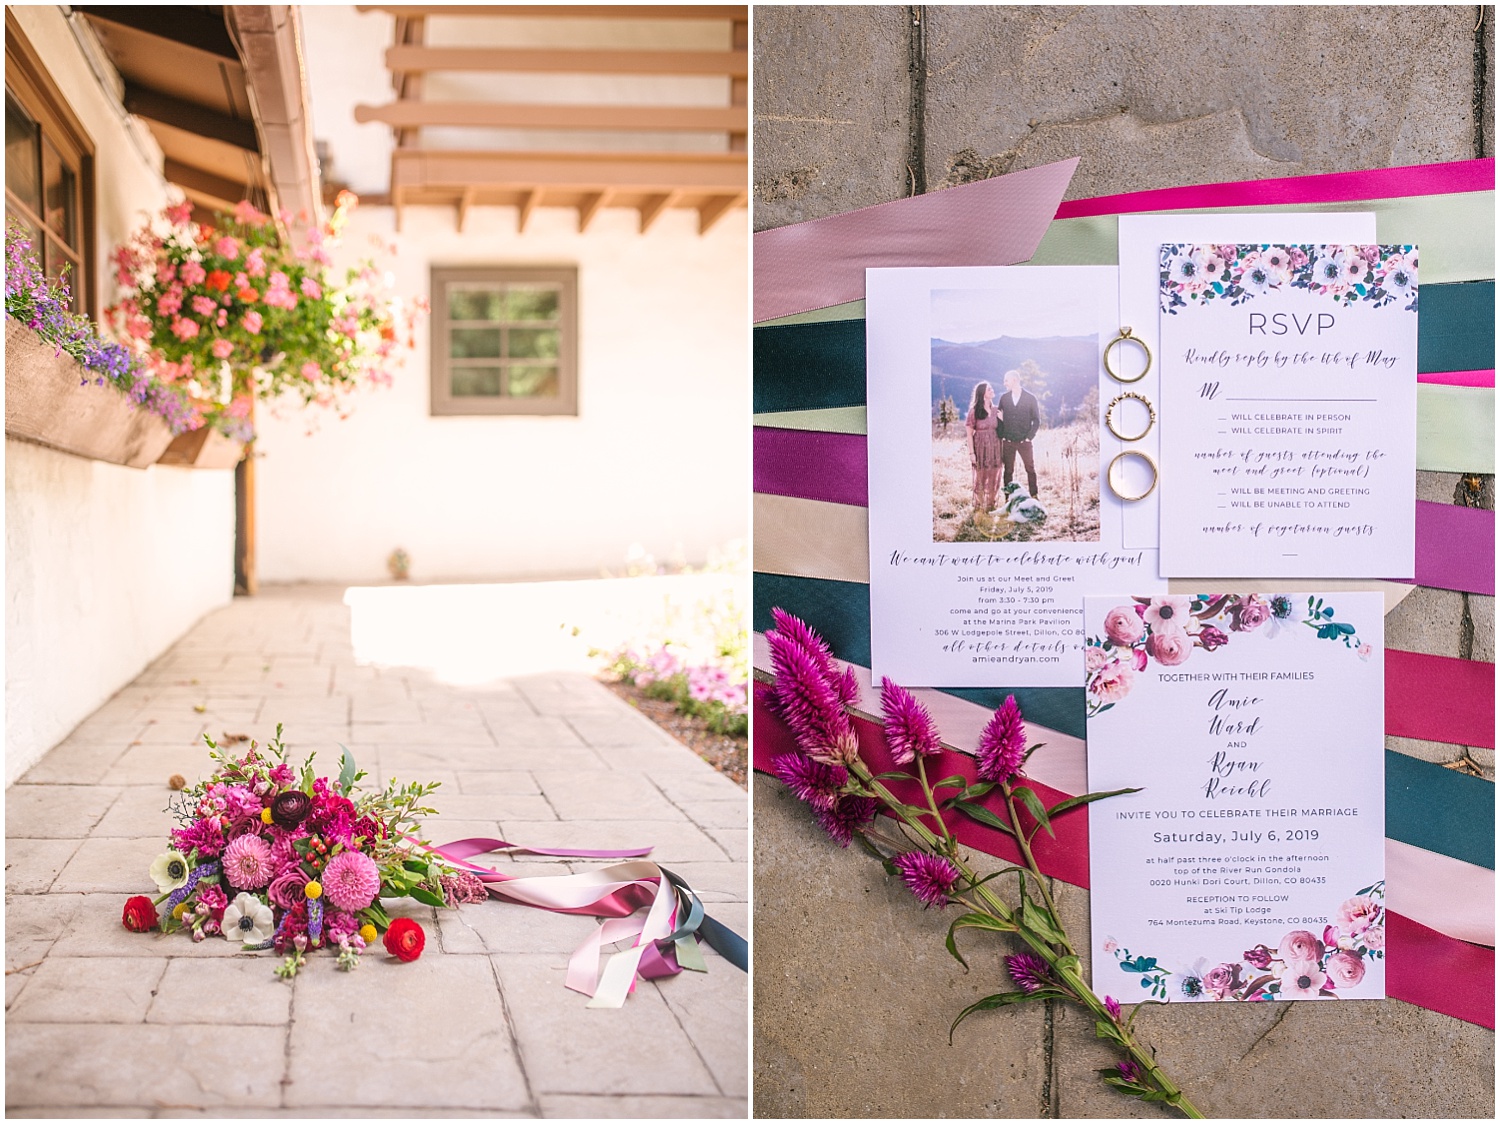 Flowers, rings, and invitations for Ski Tip Lodge wedding in Keystone Colorado